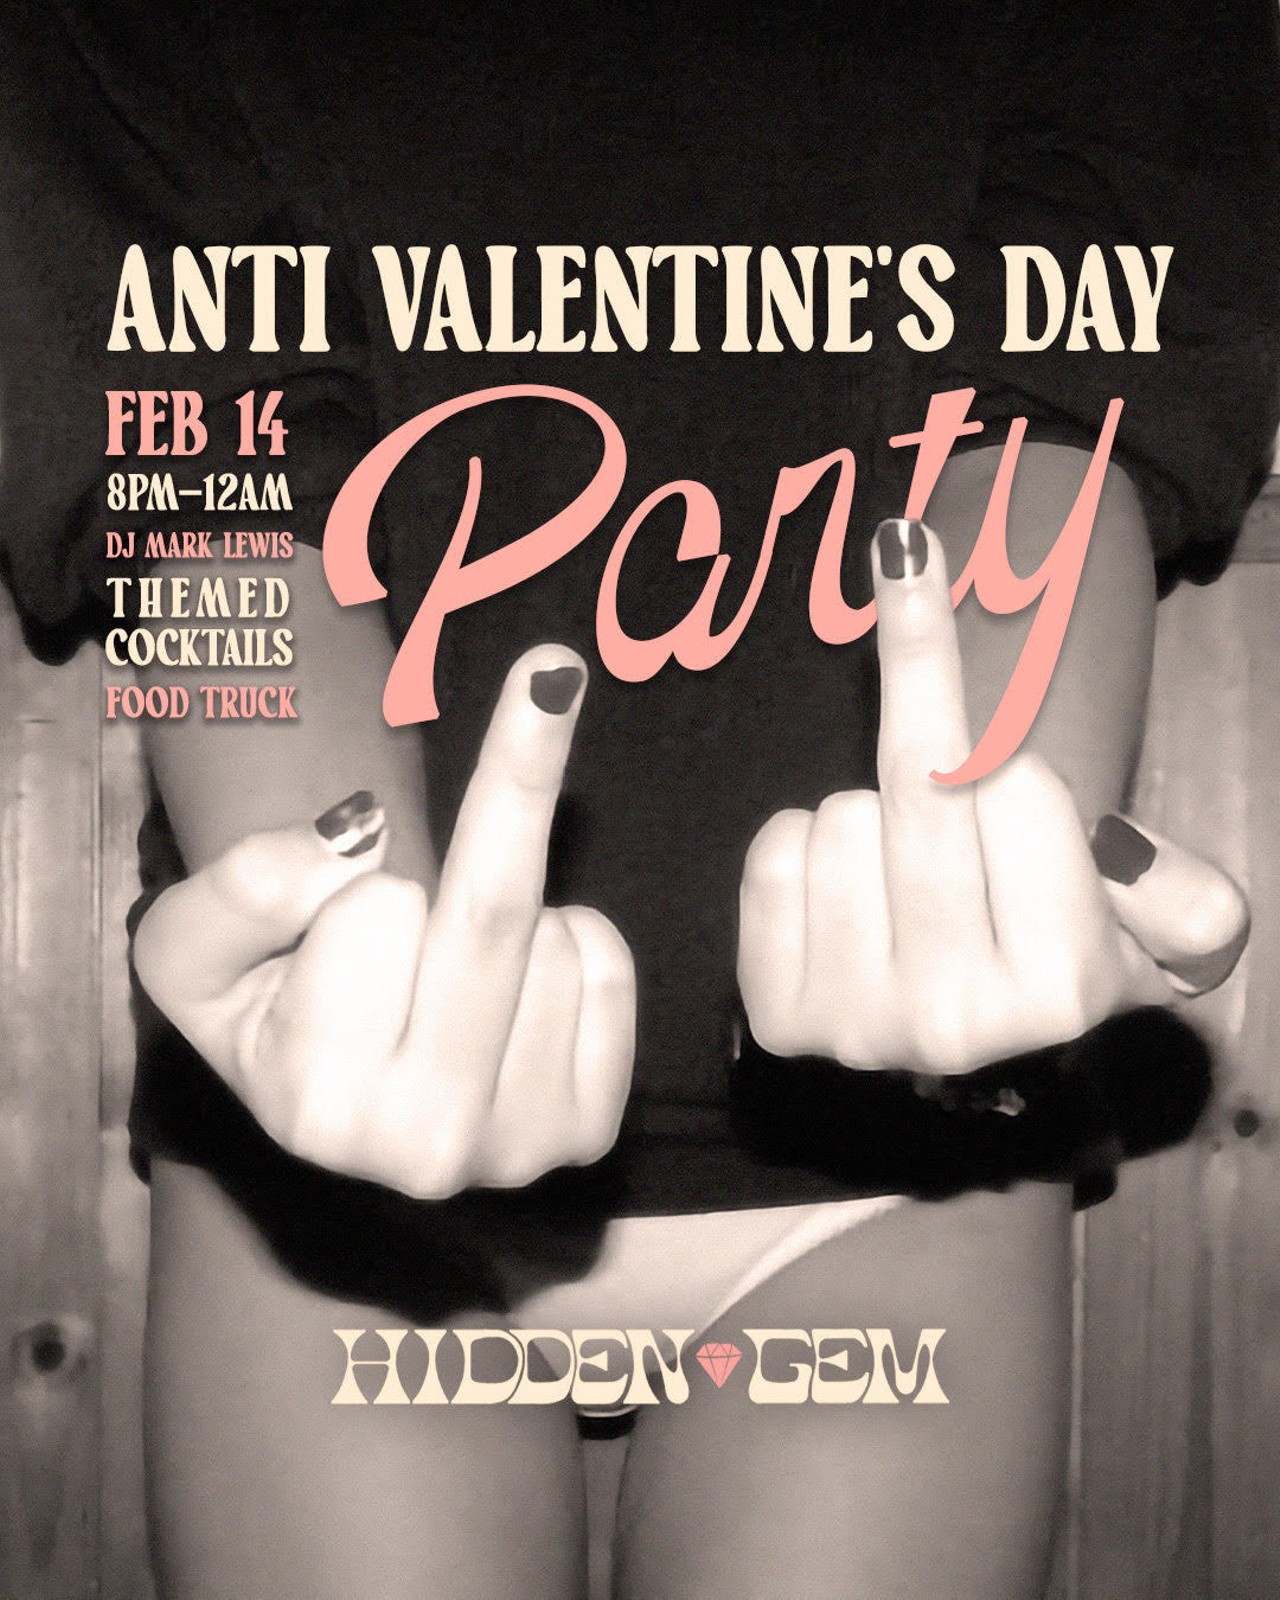 Hidden Gem&rsquo;s Anti-Valentine&rsquo;s Day Party
Whether you&rsquo;re boo&rsquo;d up or in a situationship, hang with Hidden Gem (3118 Locust Street) this February 14 from 8 p.m. to midnight for their Anti-Valentine&rsquo;s Day Party. There will be specialty-themed cocktails such as Call Me Never, Not Here for You, Take Up Space and Serving Cunt&rdquo; (yes, really!). DJ Mark Lewis will be providing the vibes and food trucks for those late-night cravings. Also, on Saturday, February 17, Hidden Gems is hosting Drag Bingo from 9:30 a.m. to noon and 1 to 3:30 p.m. There will be a cash bar, free DIY glitter bar, free photobooth, palm readings, hair tinsel, nail art and more. Feel free to BYO-brunch as well. Tickets ($50) are available on the Golden Gems&rsquo; website.